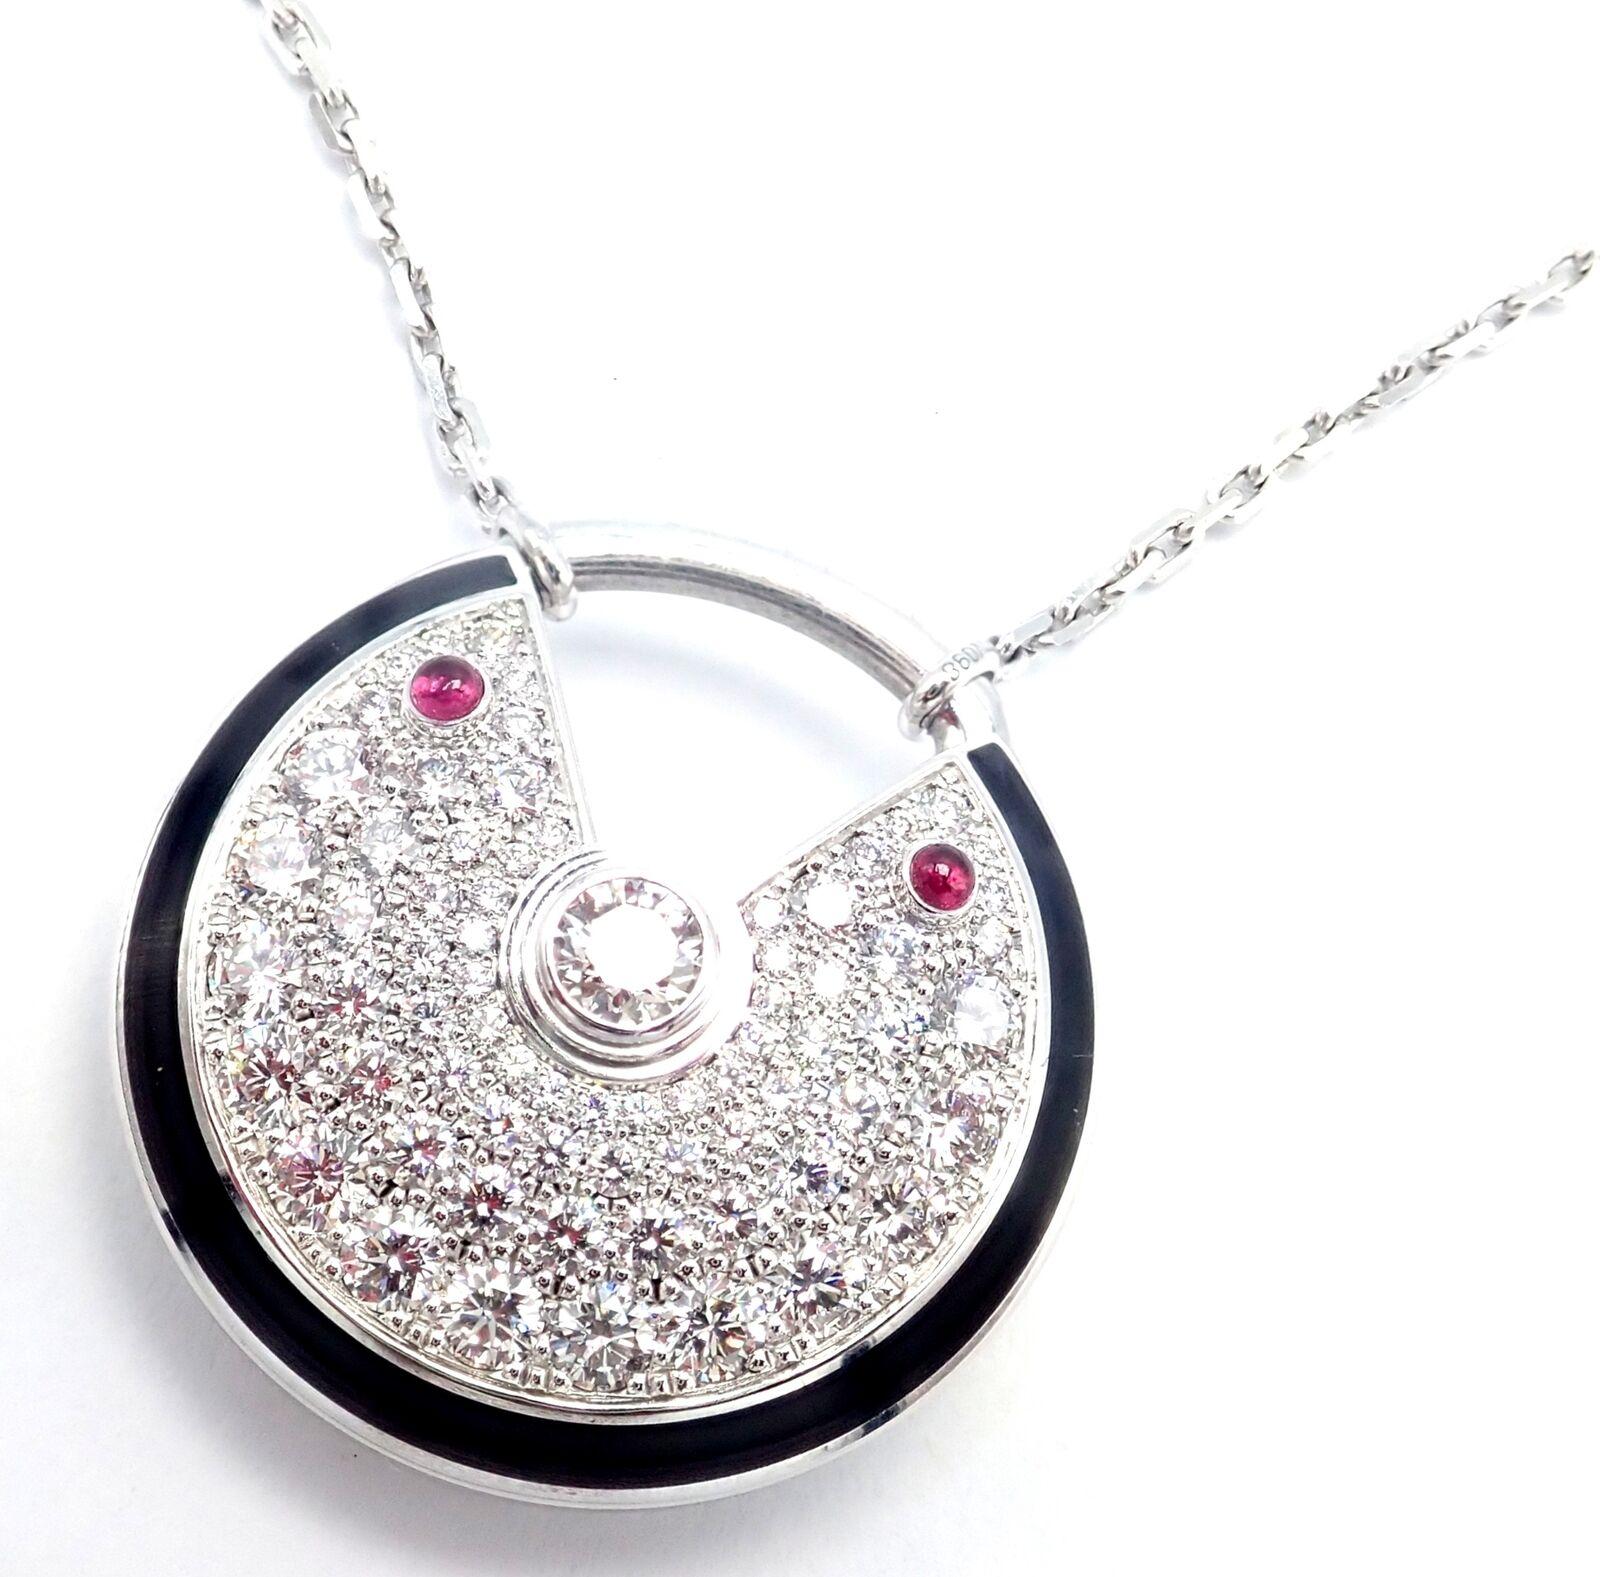 18k White Gold Diamond Ruby Large Amulette Pendant Necklace by Cartier.
With 70 Round Brilliant Cut Diamonds VVS1clarity, E color total weight approximately 1.40ct
2 rubies total weight approximately .15ct
This necklace is in mint condition and